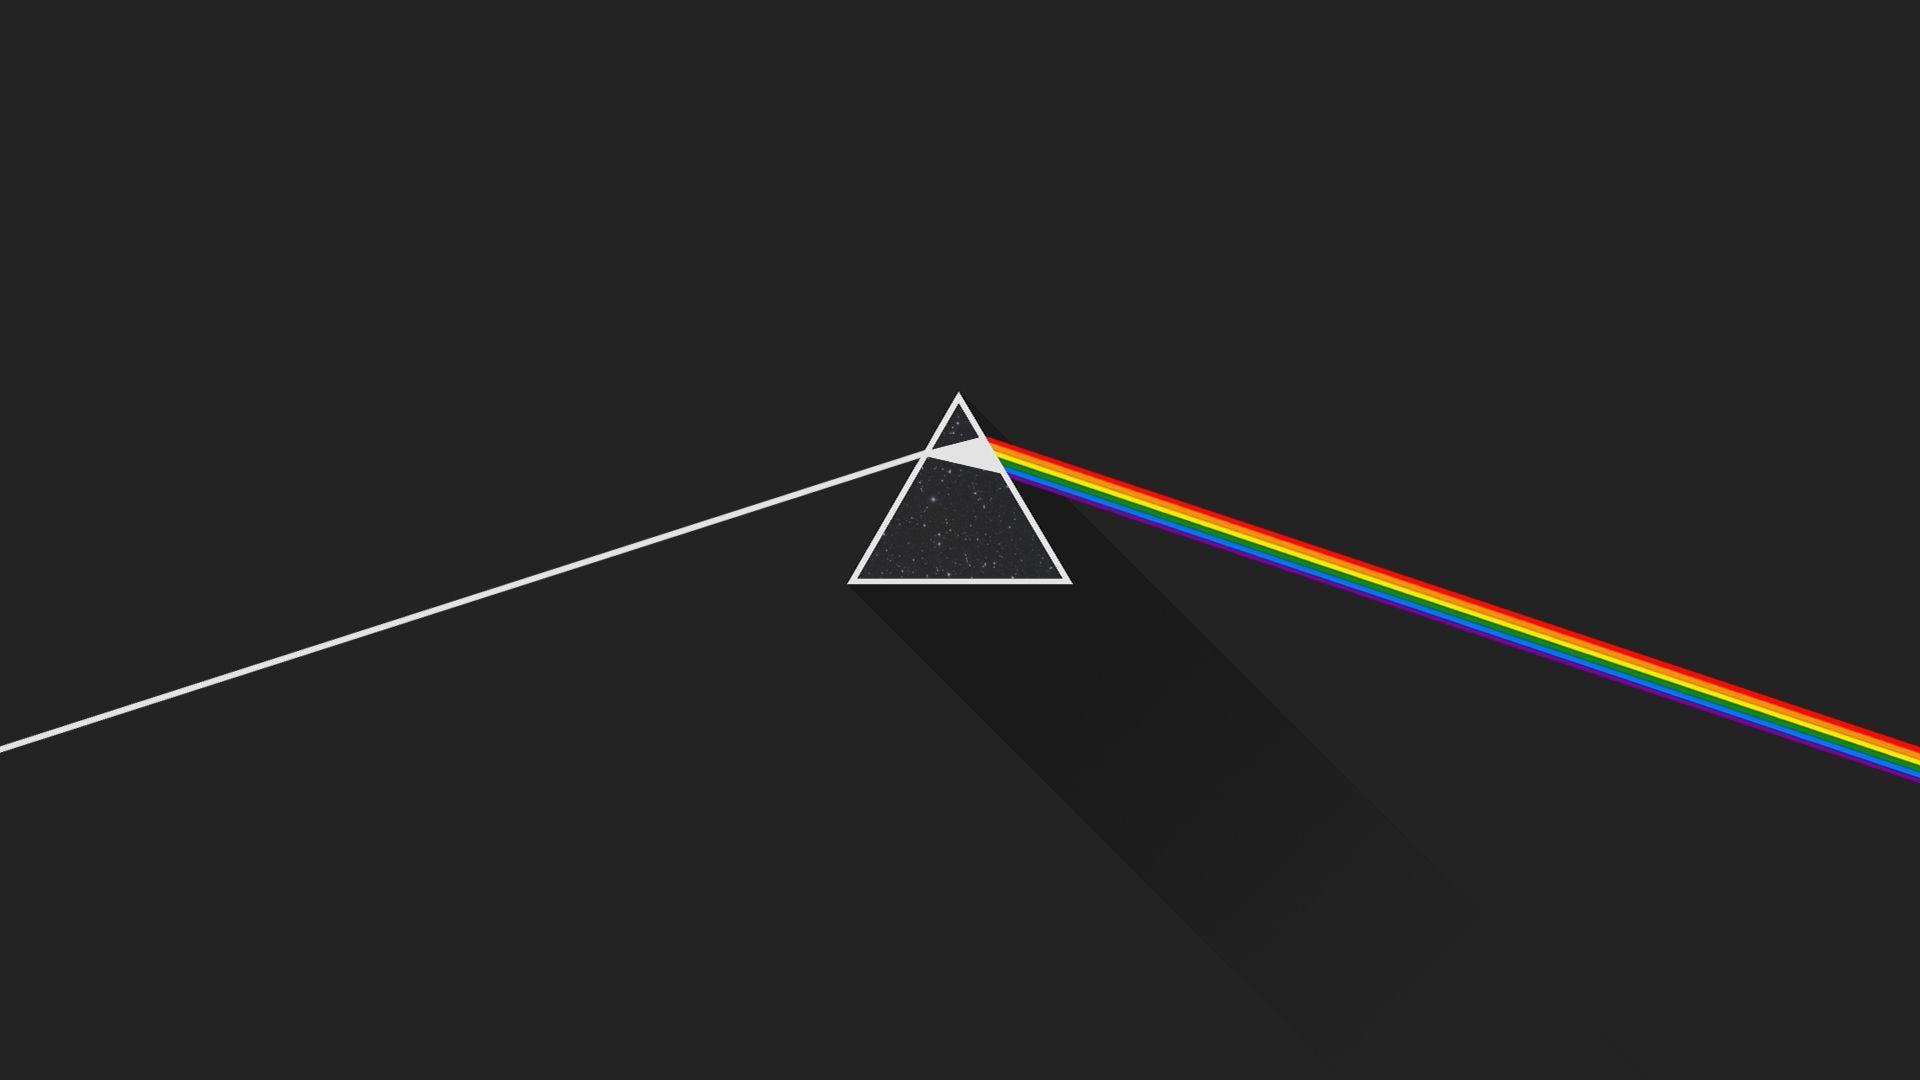 10 Best The Dark Side Of The Moon Wallpapers FULL HD 1920×1080 For PC